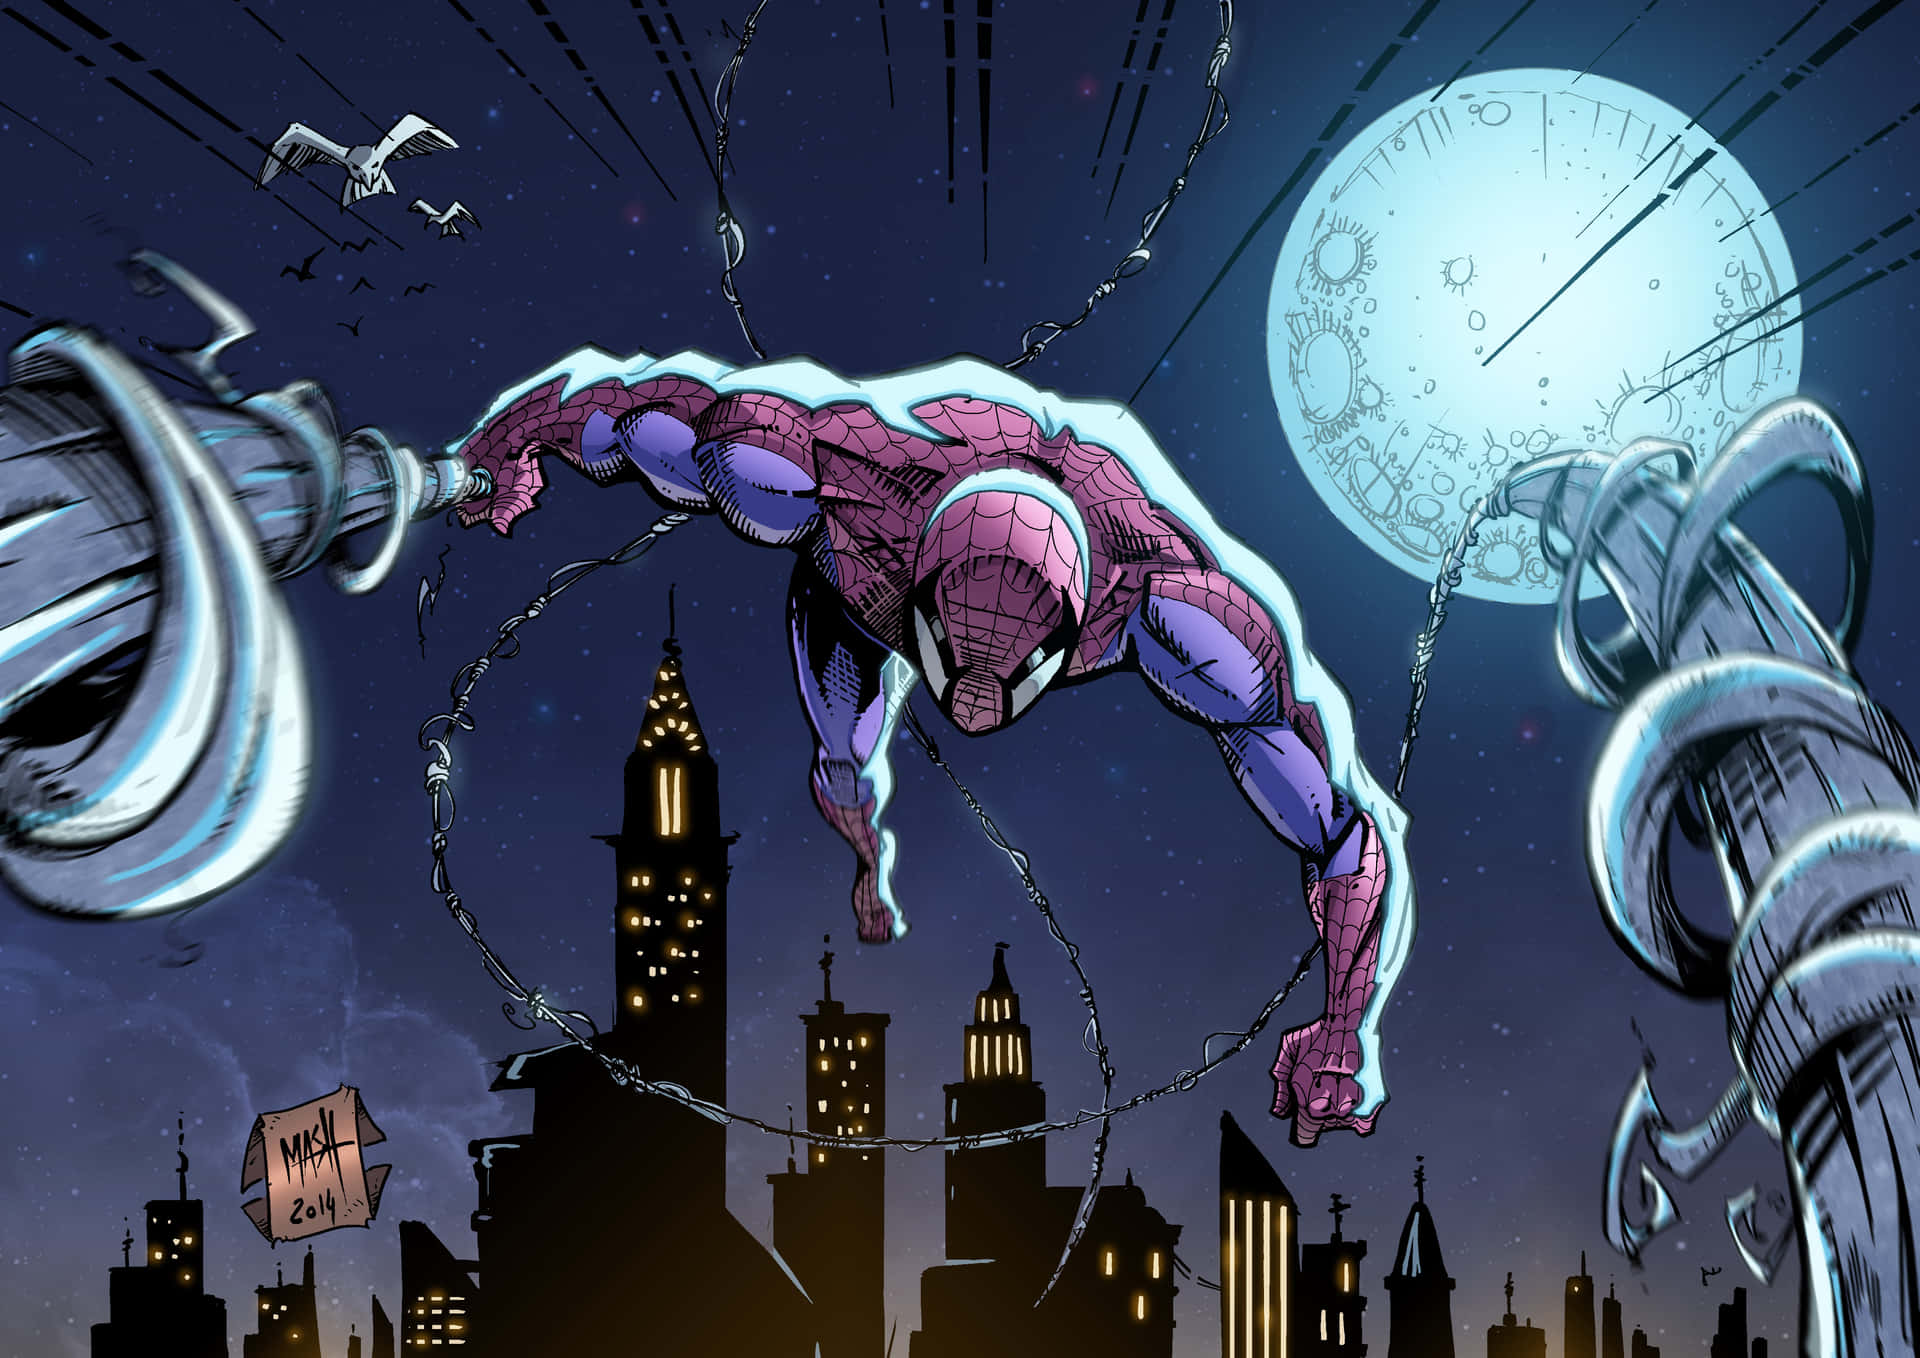 The Amazing Spider Man Swings Through The City To Defeat Villains